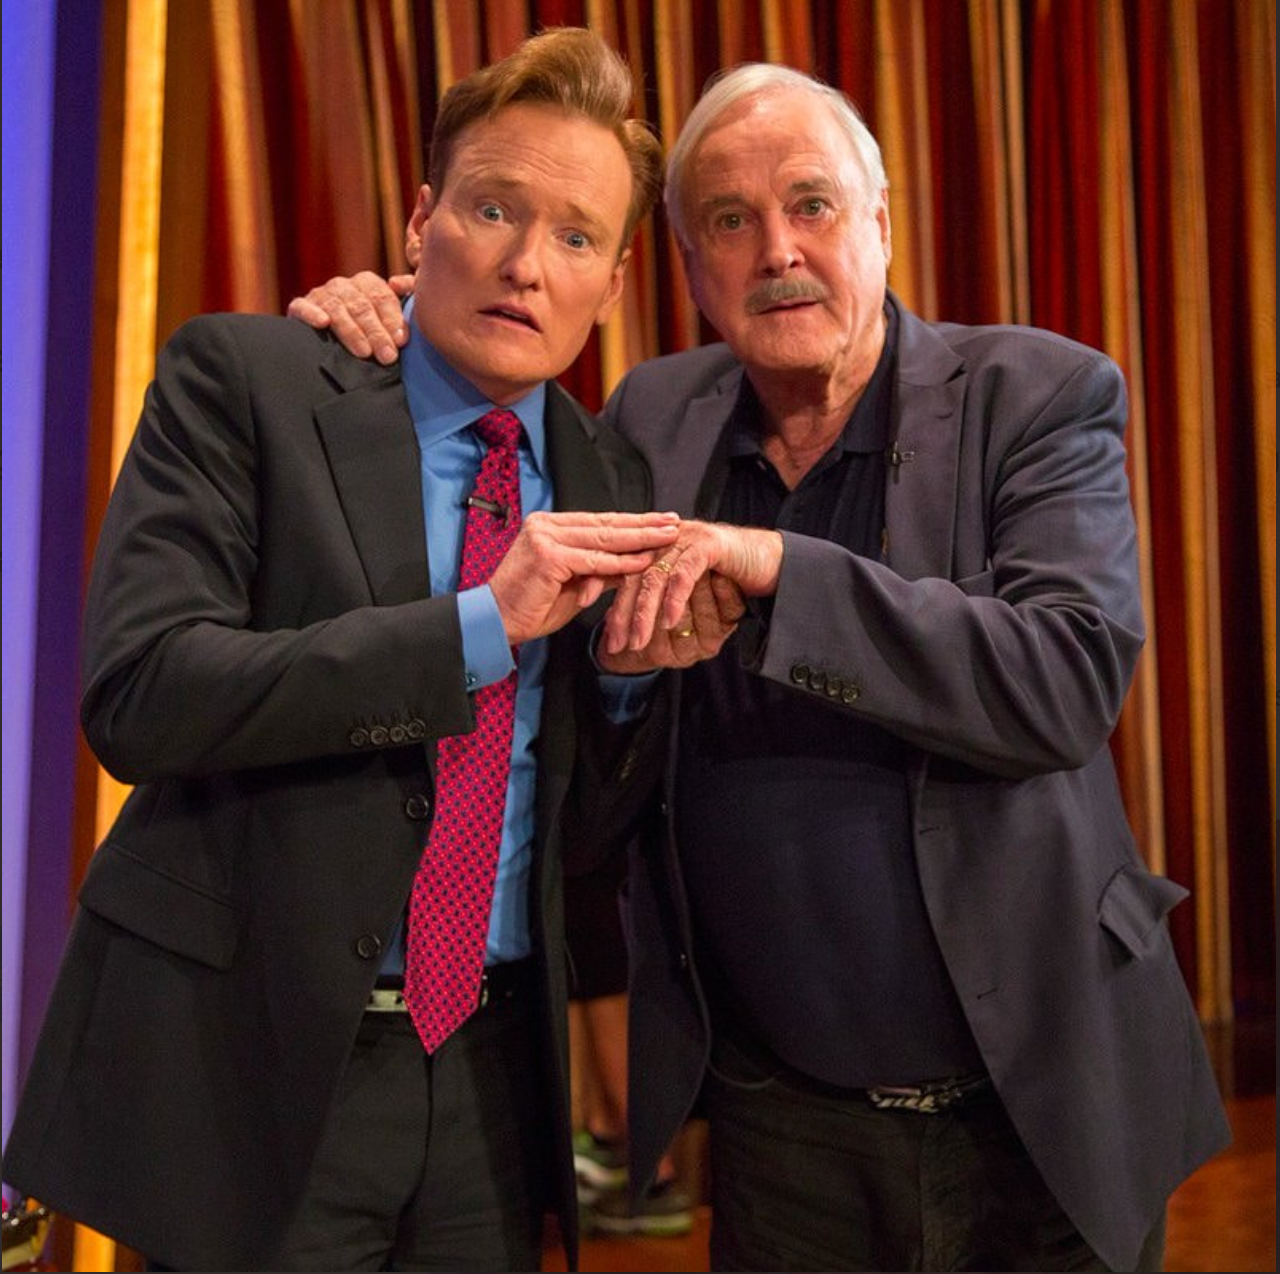 Conan O'Brien and John Cleese holding hands